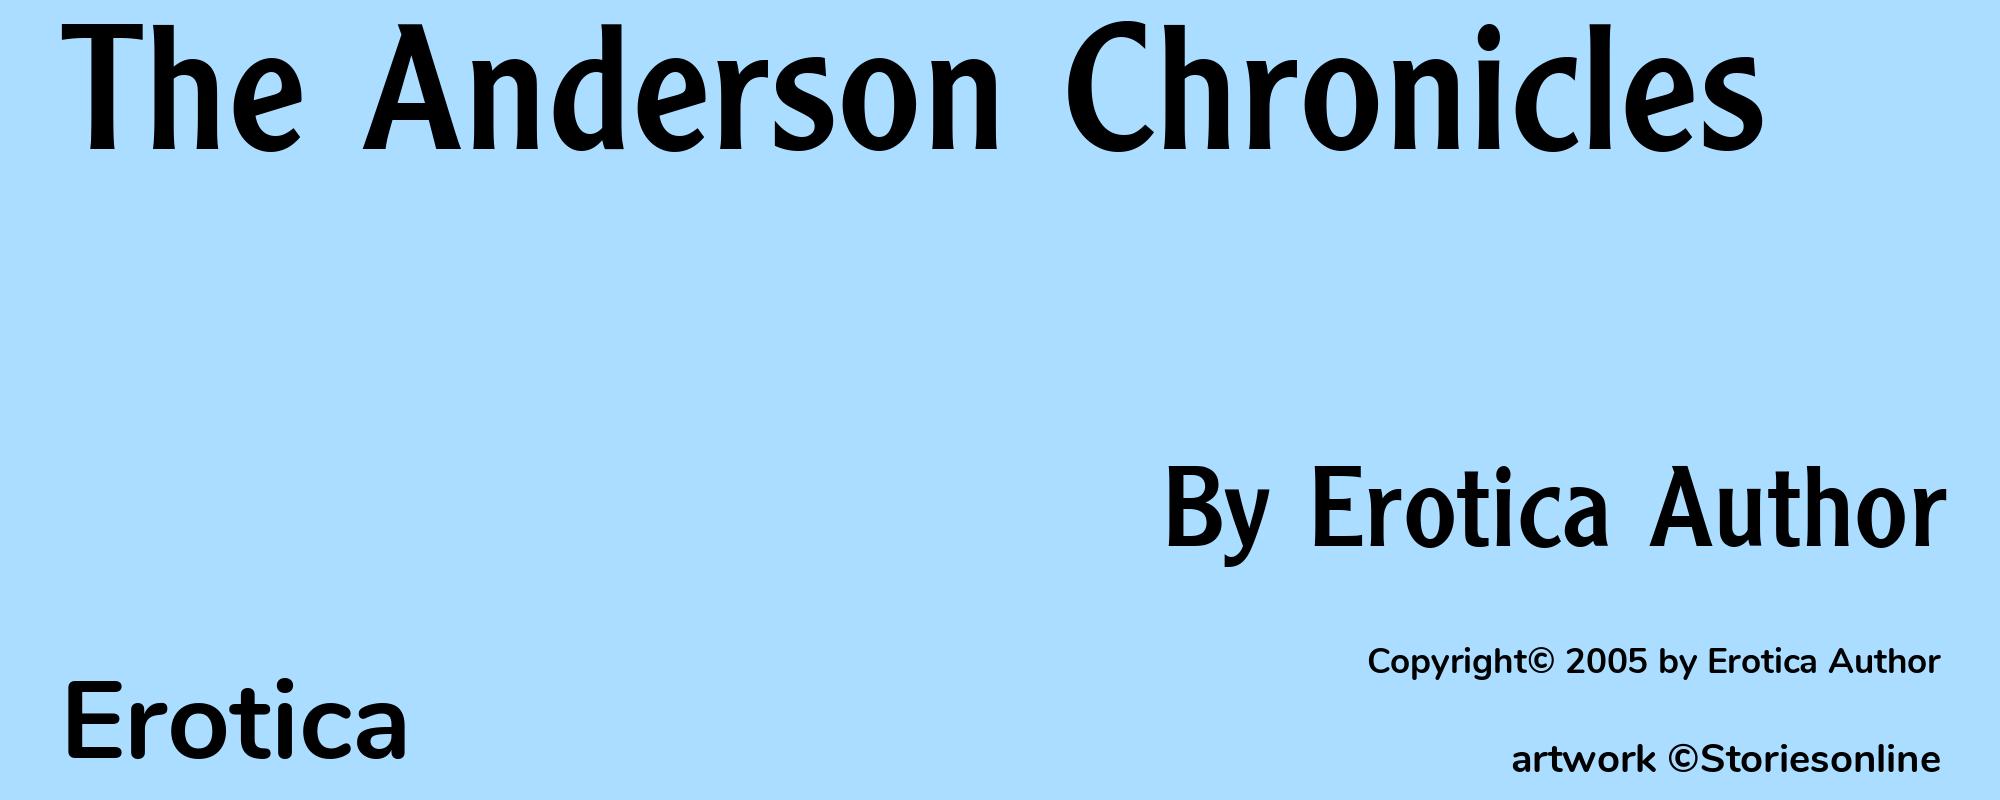 The Anderson Chronicles - Cover